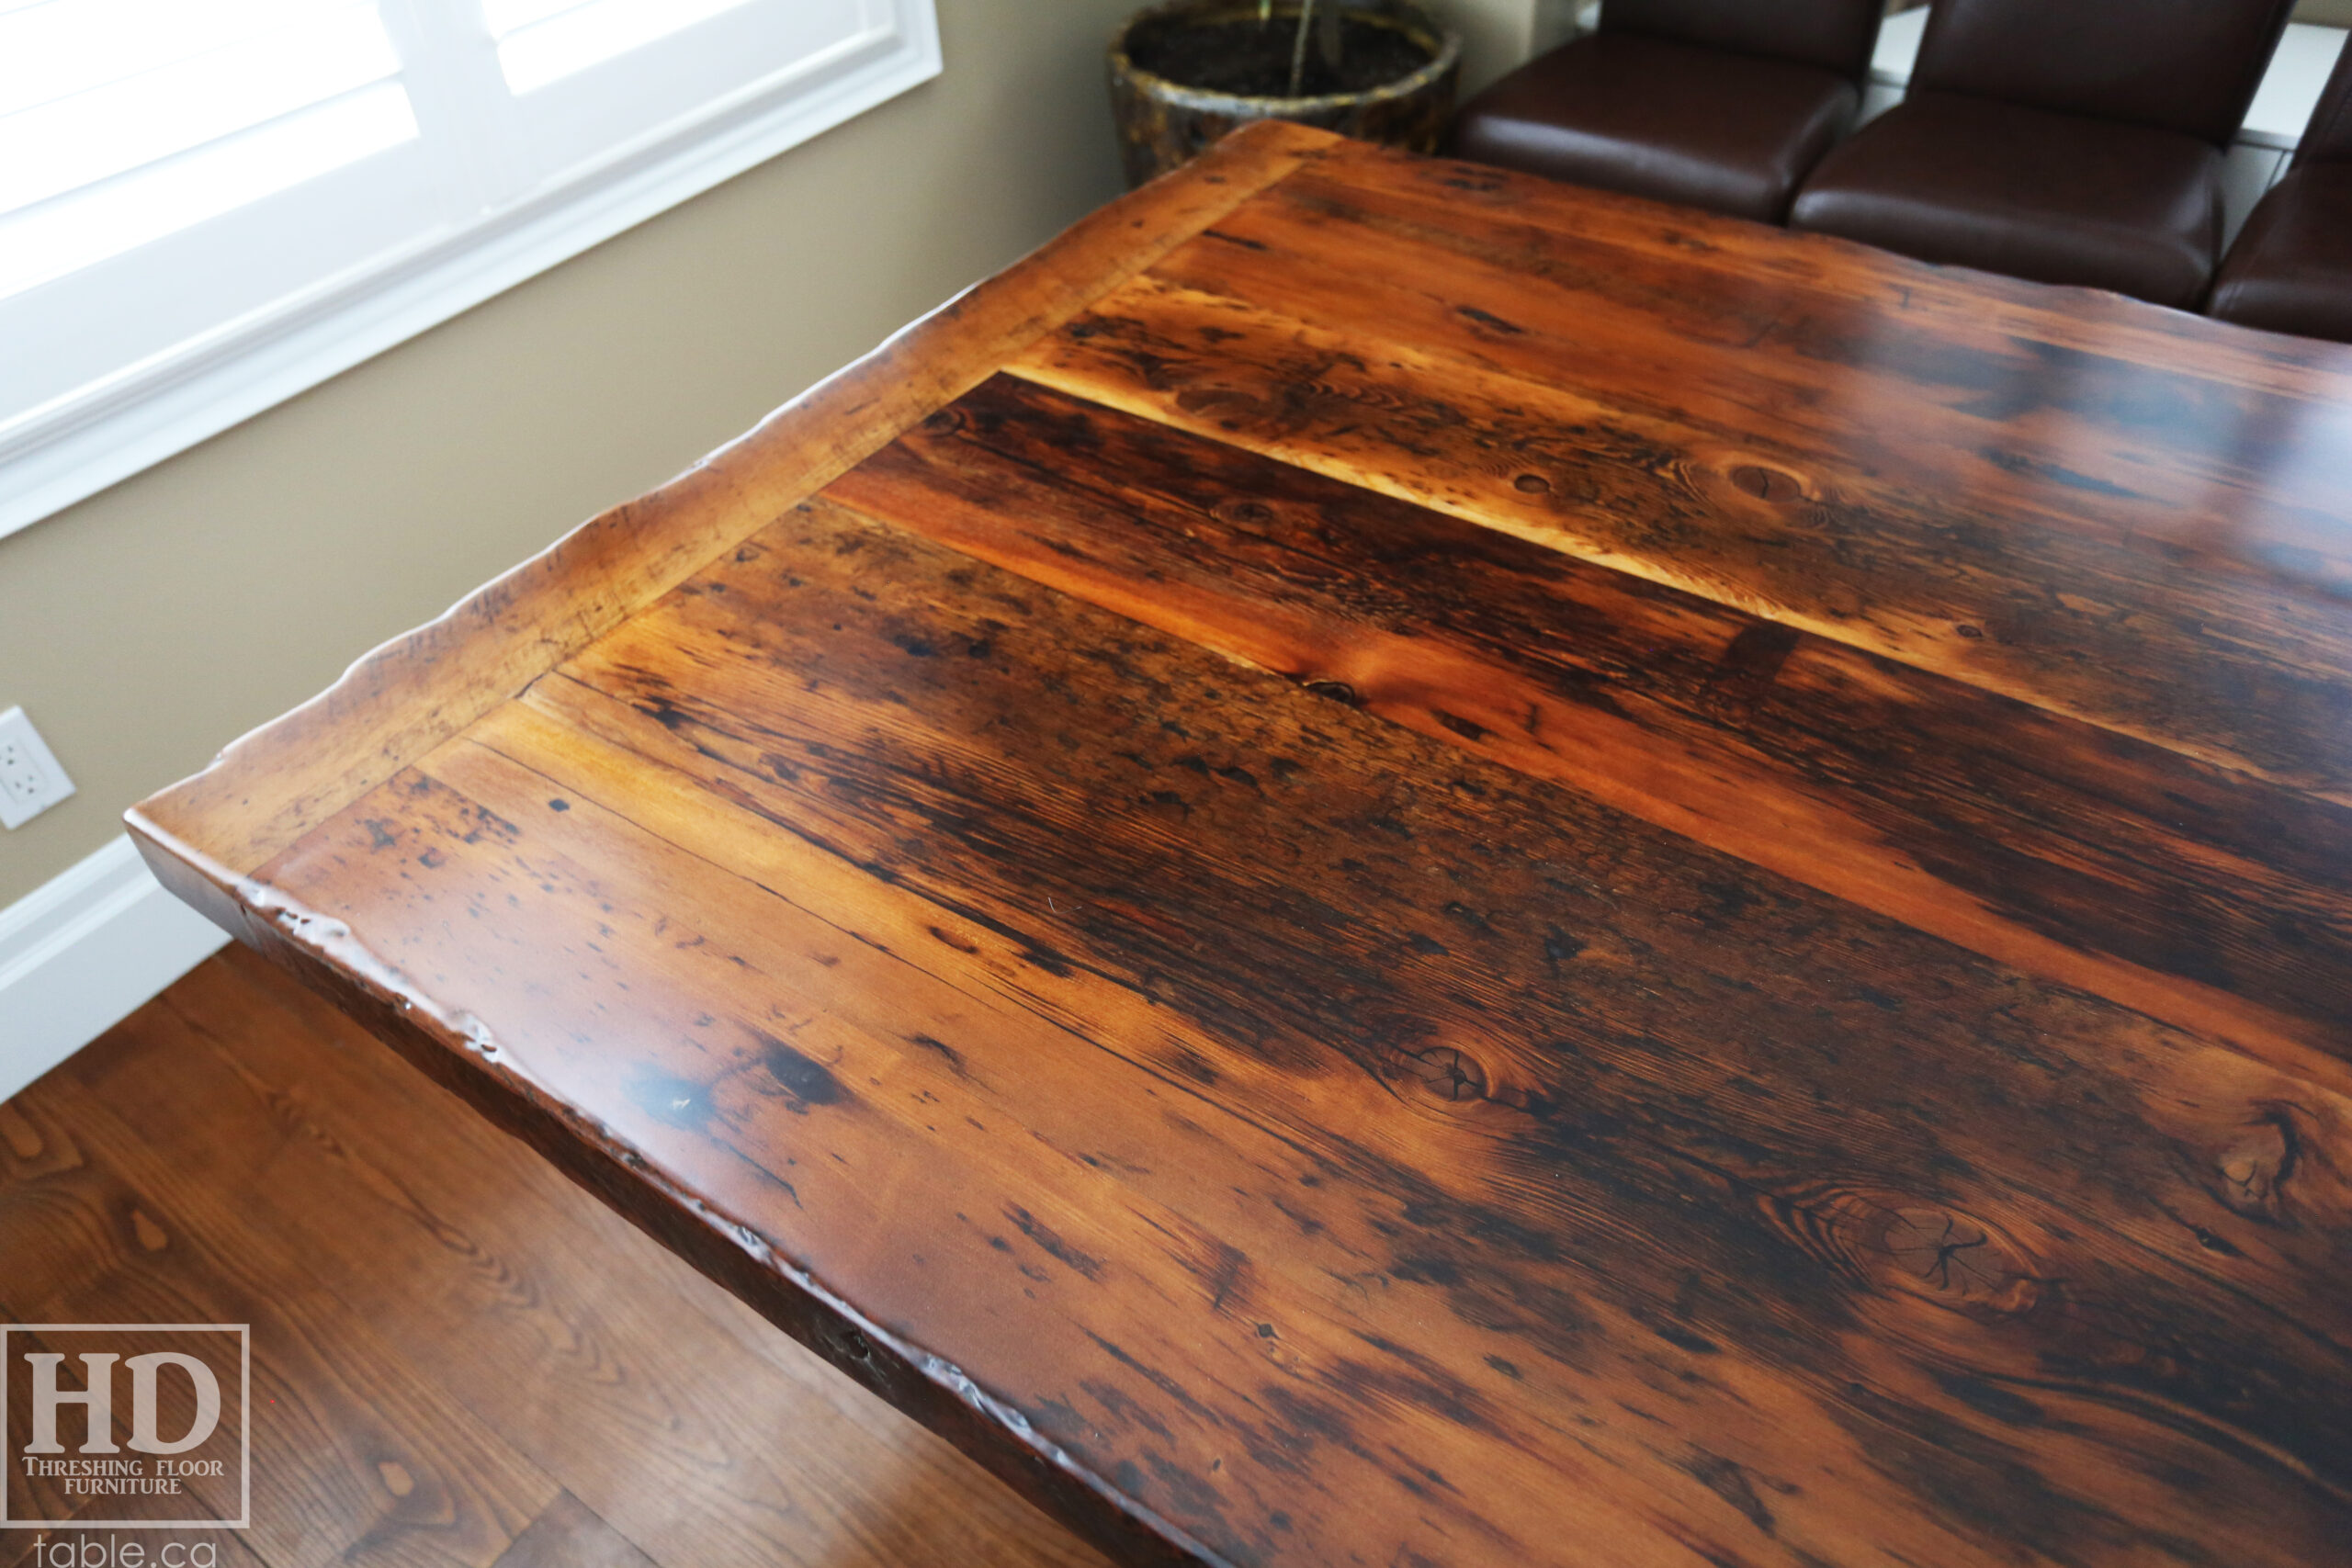 Reclaimed Wood Table with Epoxy Finish by HD Threshing Floor Furniture / www.table.ca